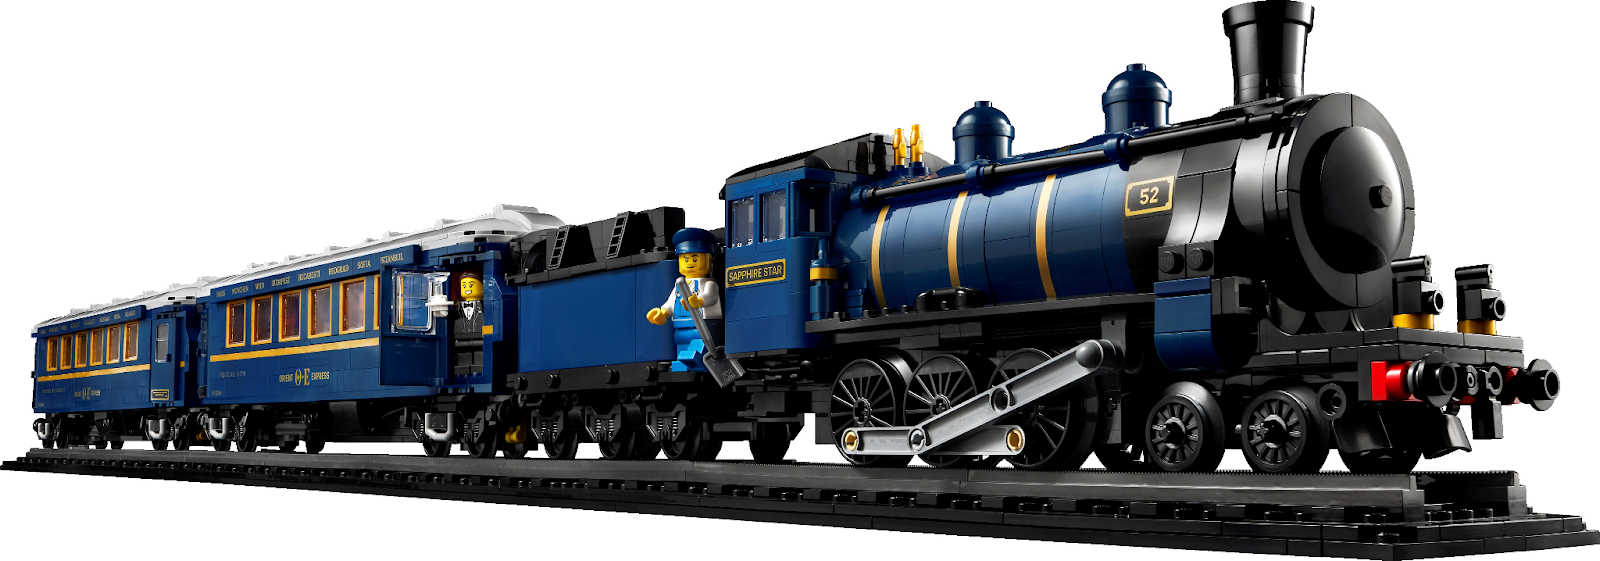 Lego travels back in time with Orent Express set -Toy World Magazine